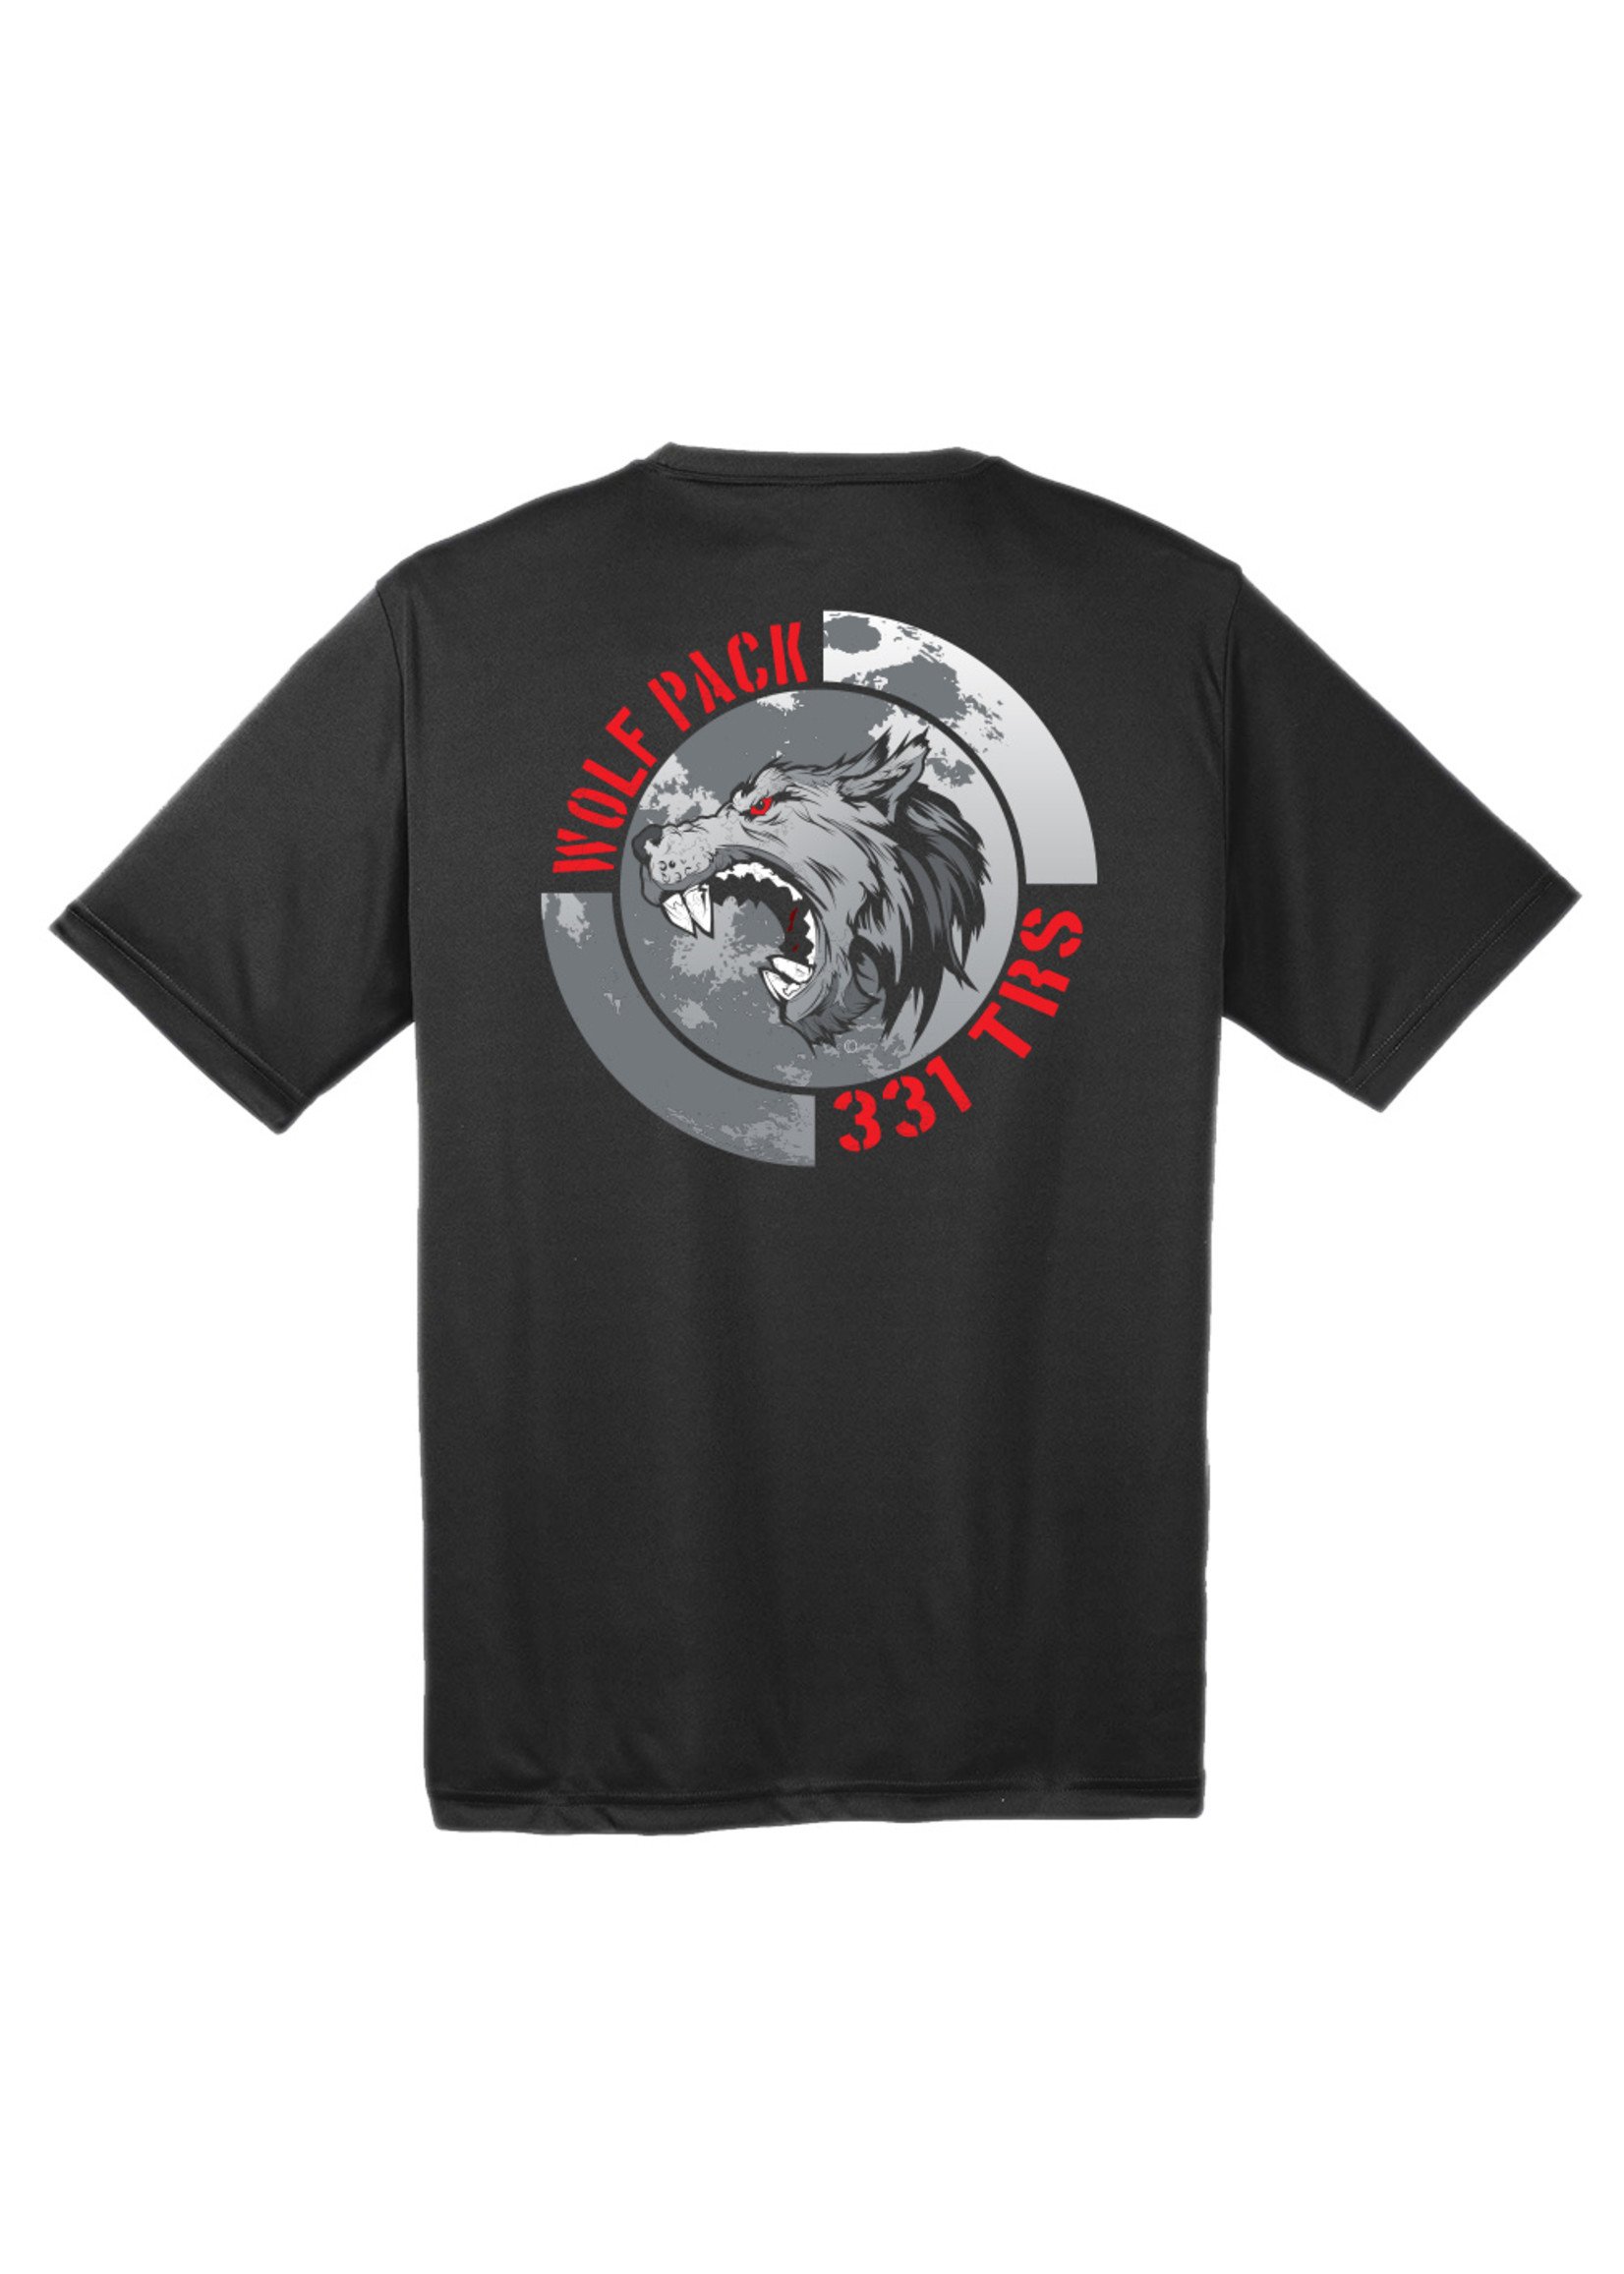 331st Wolfpack Wicking Shirt